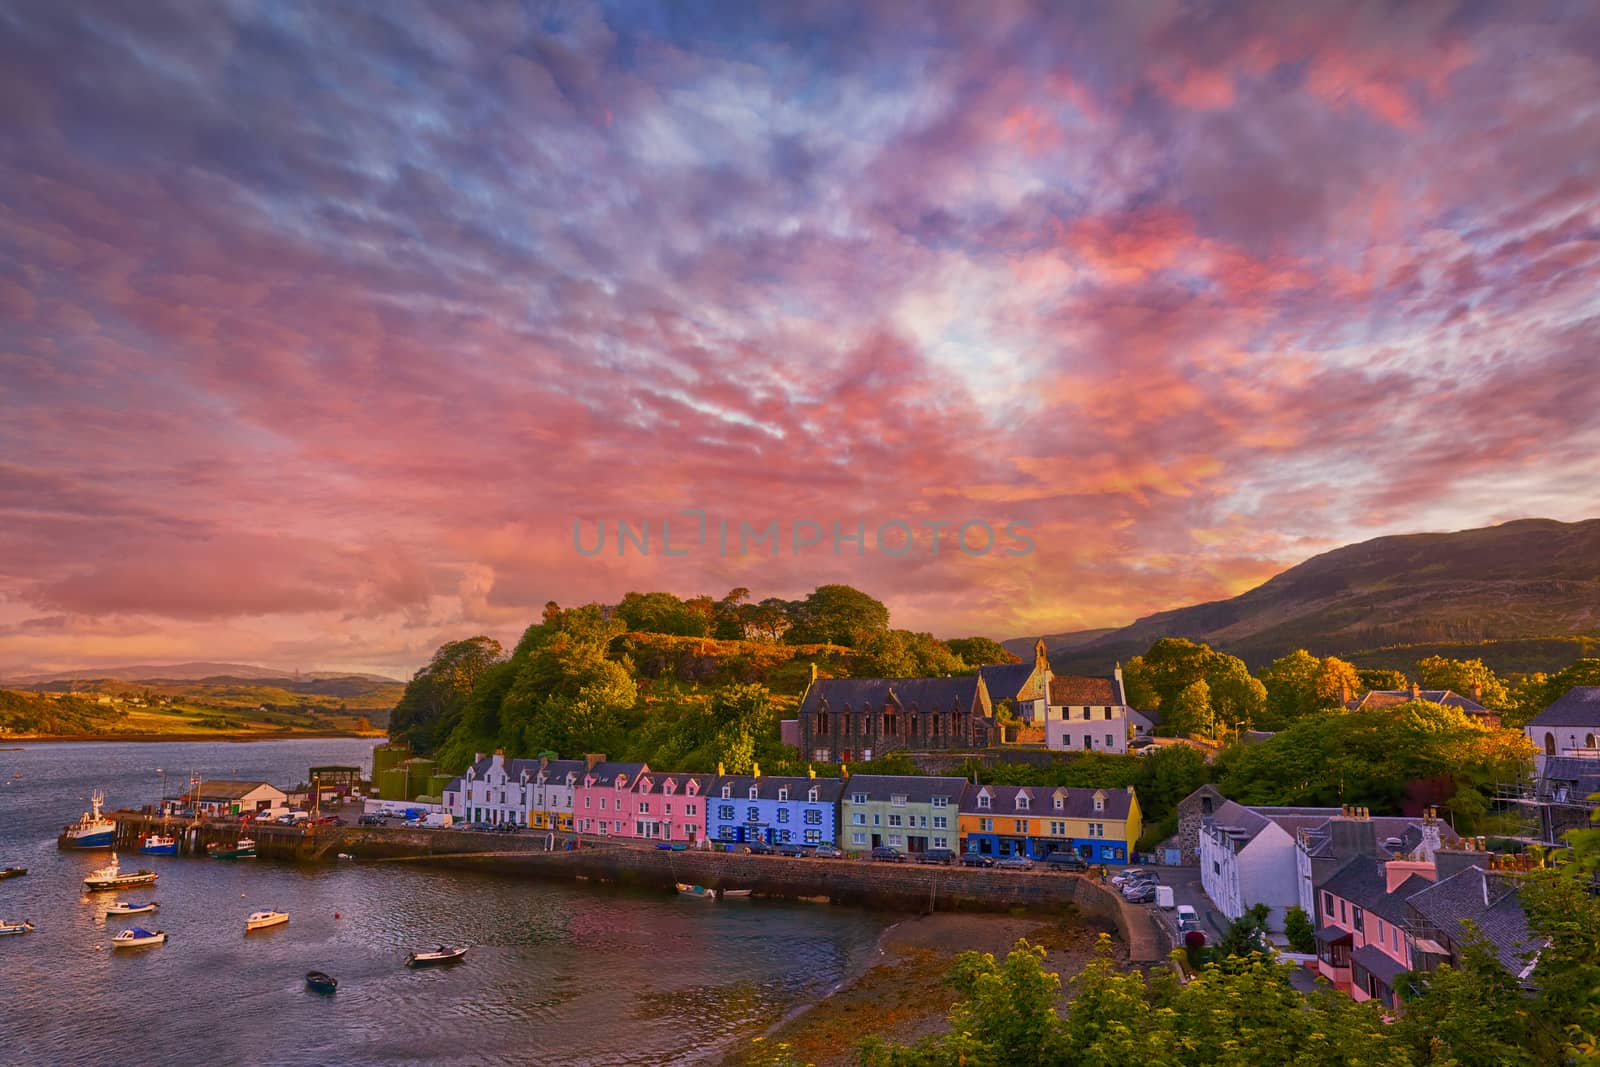 sunset over famous Quay street in Portree, Isle of Skye, Scotland